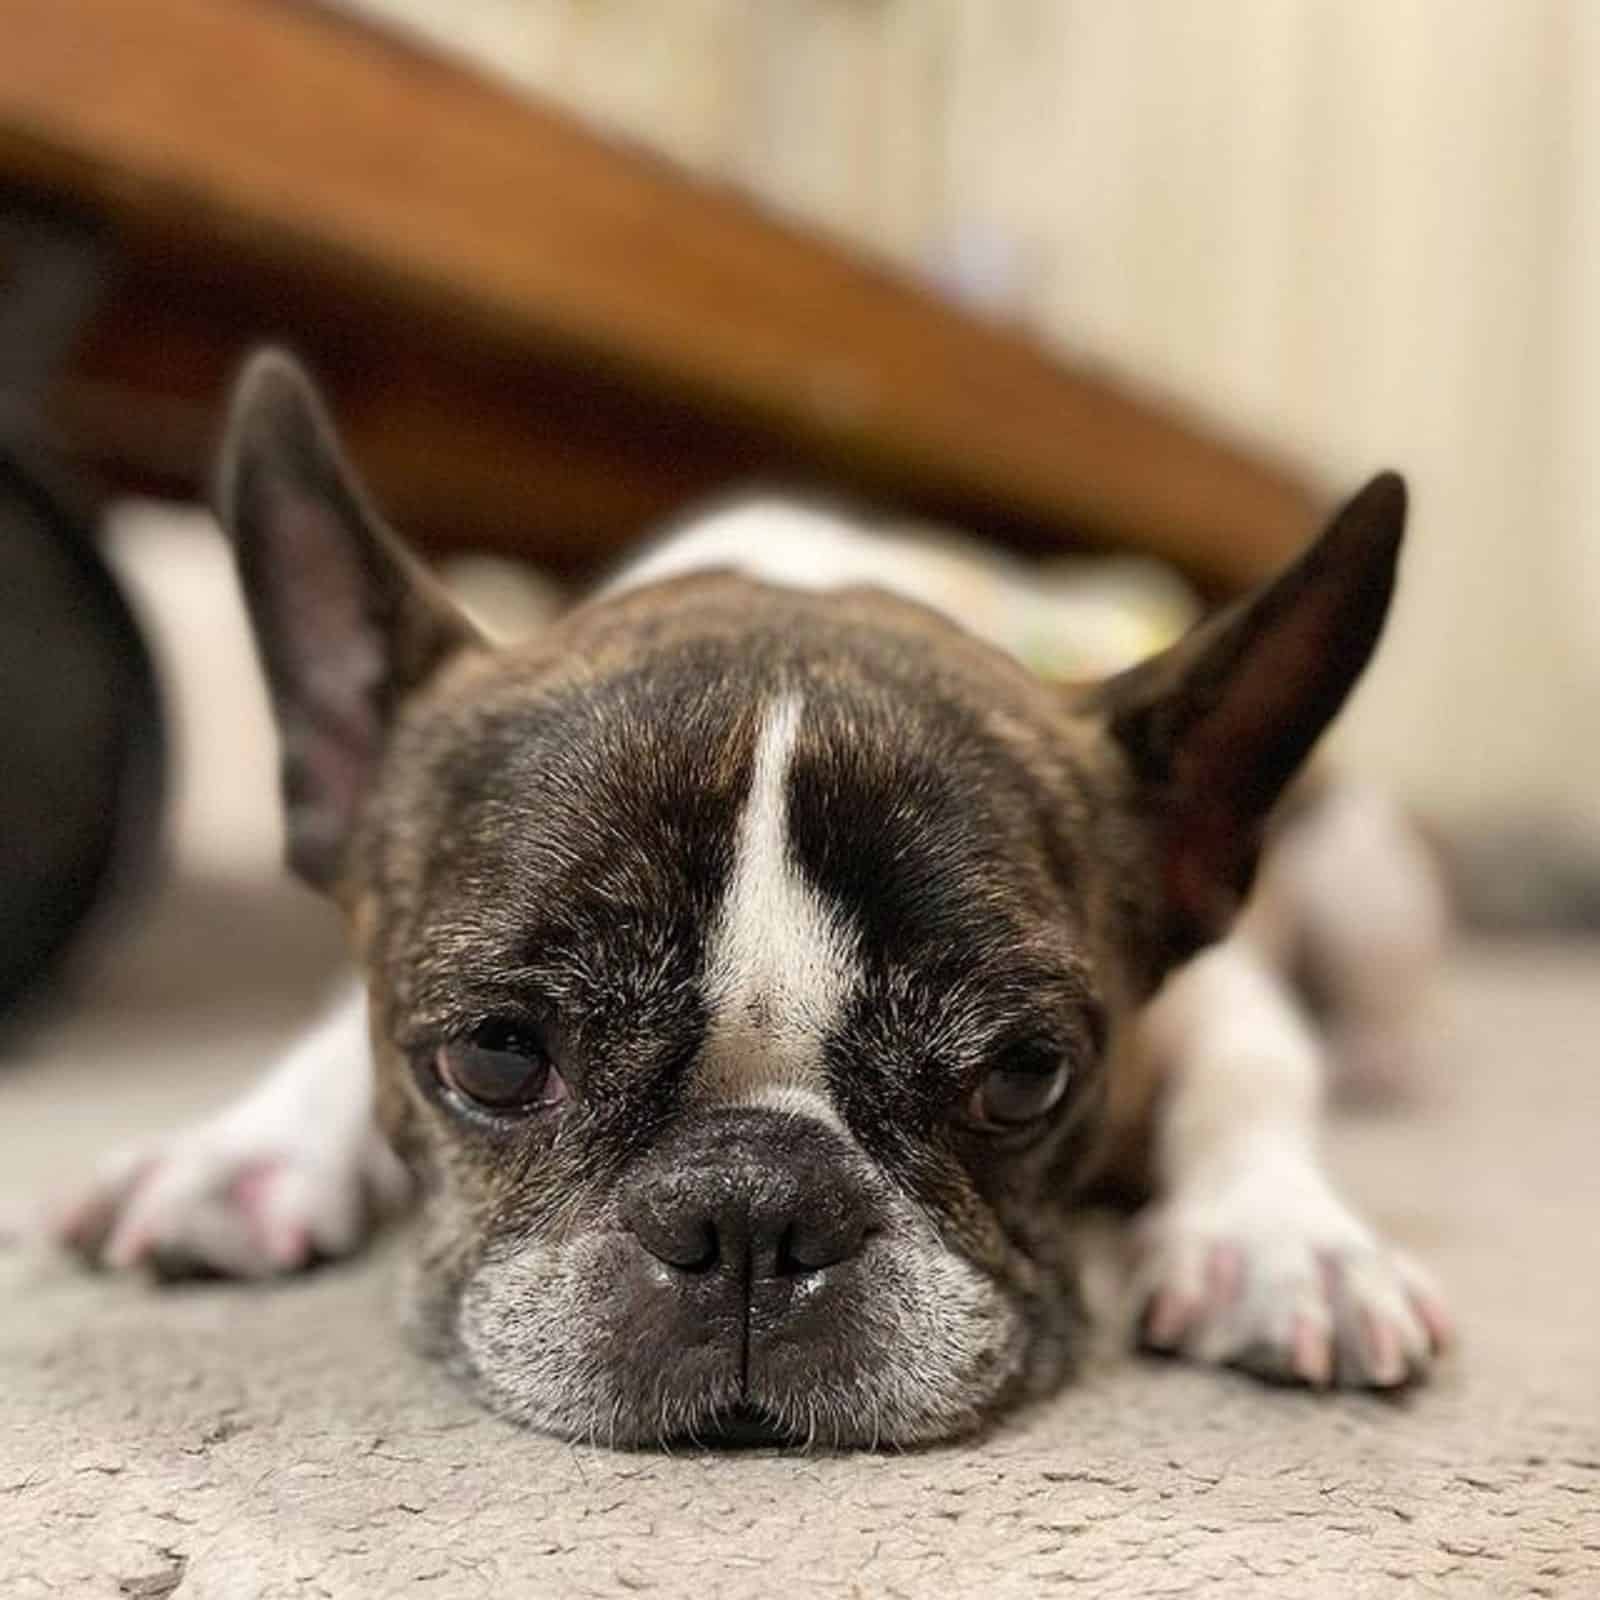 brindle pied french bulldog lying on the floor in apartment